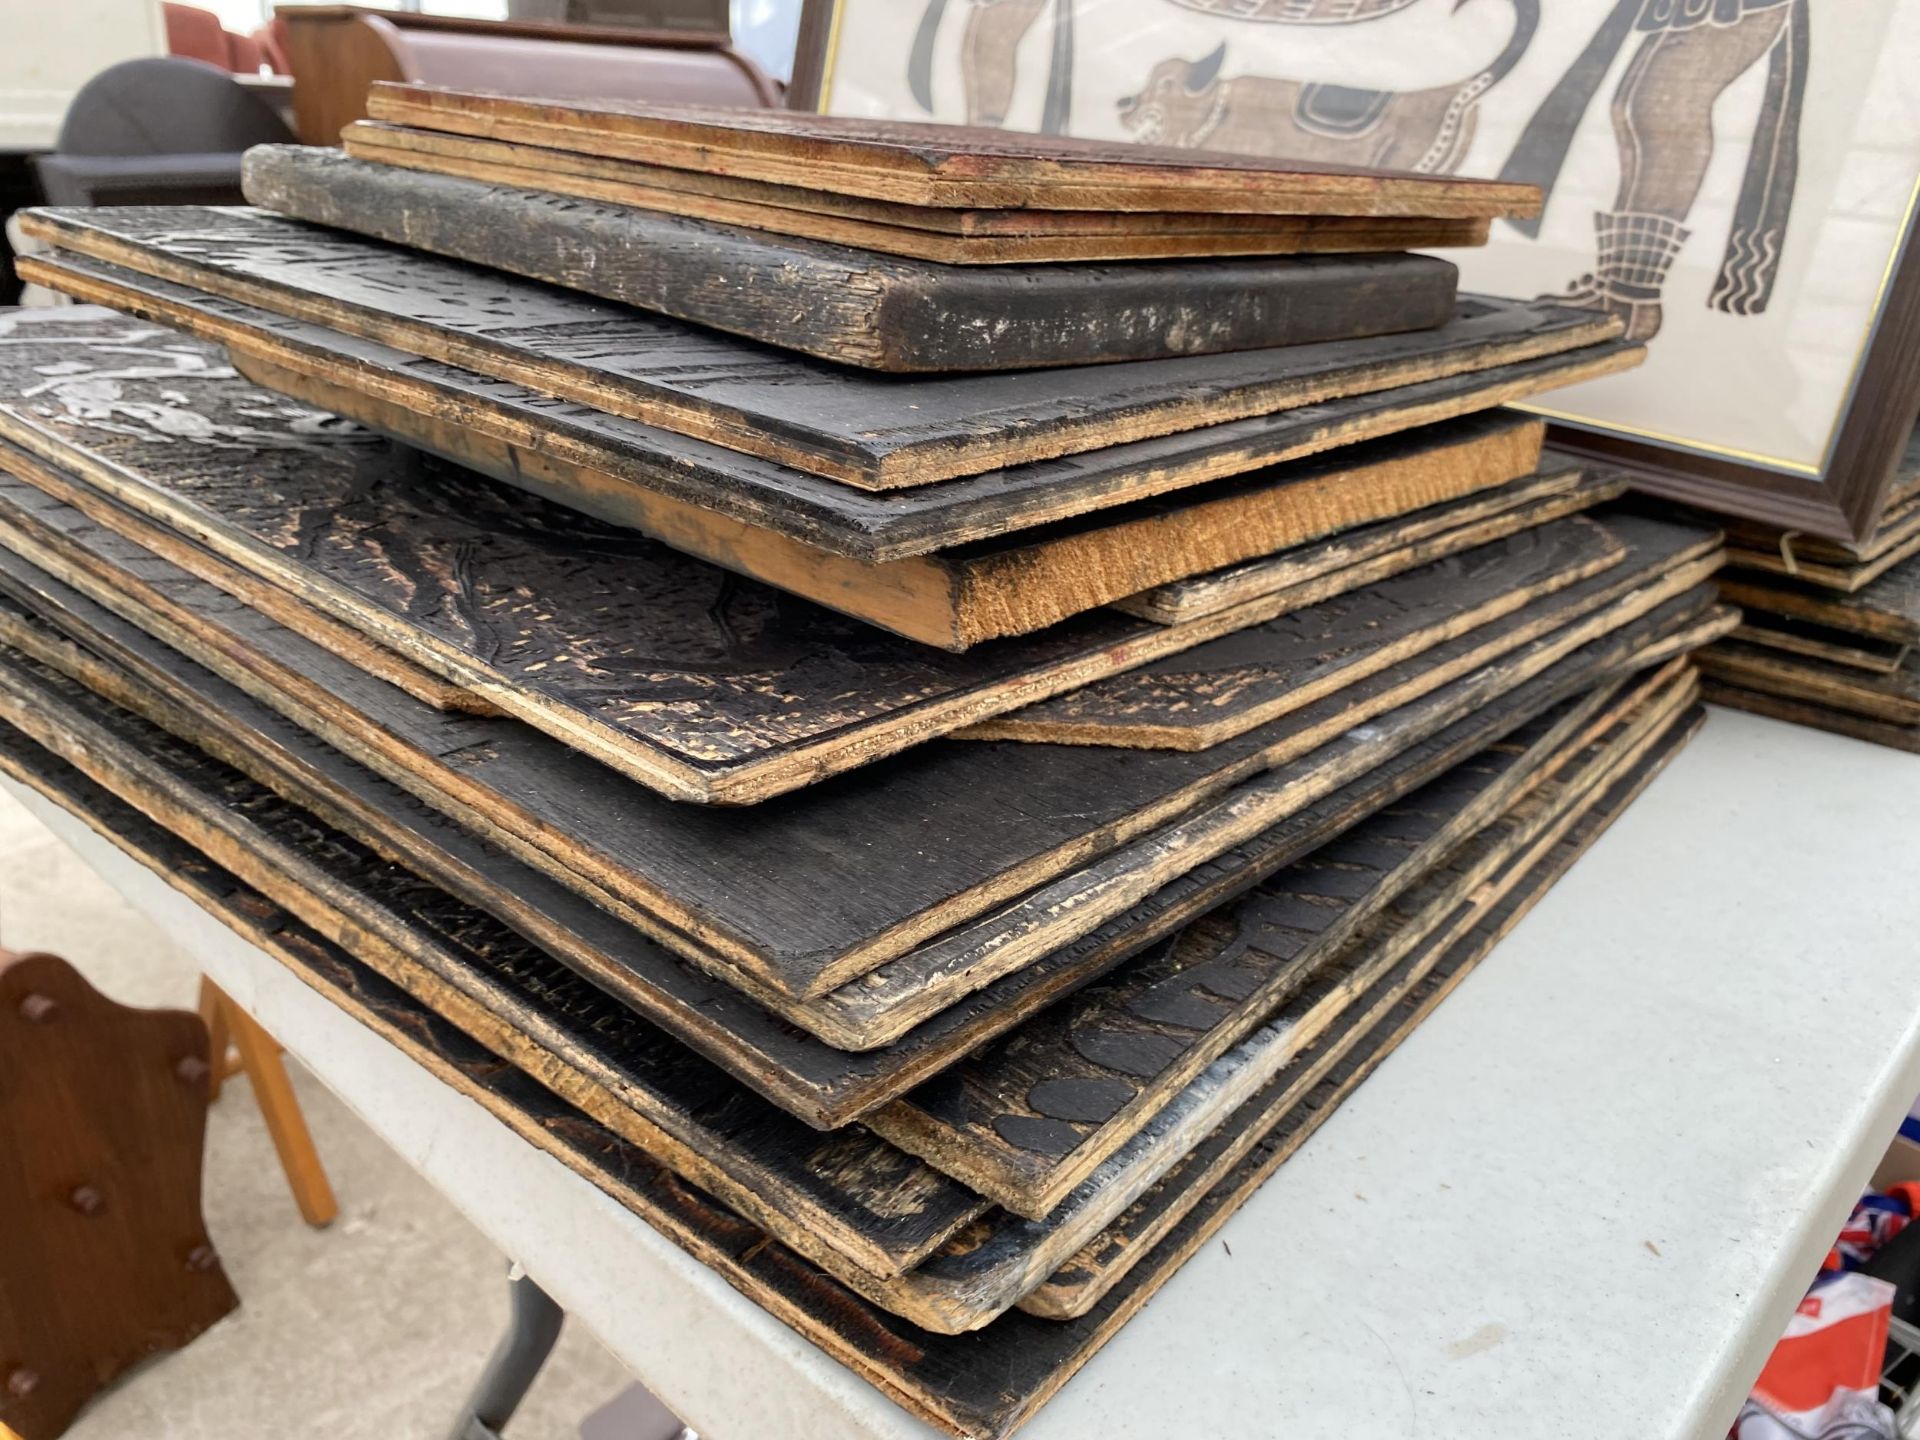 A LARGE QUANTITY OF CARVED WOODEN PANELS - Image 5 of 5